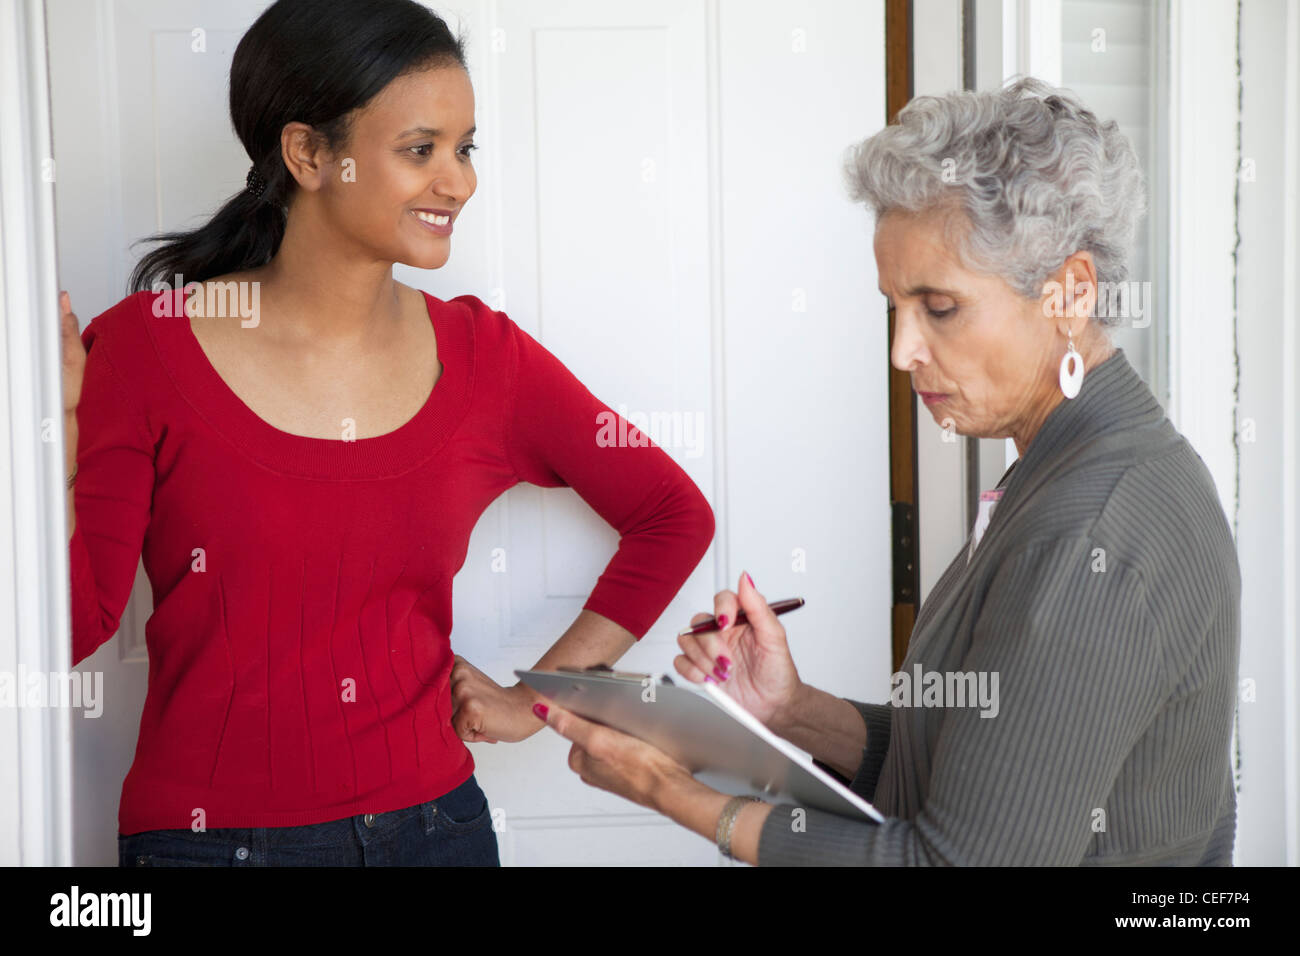 Black woman greeting a solicitor at her front door Stock Photo